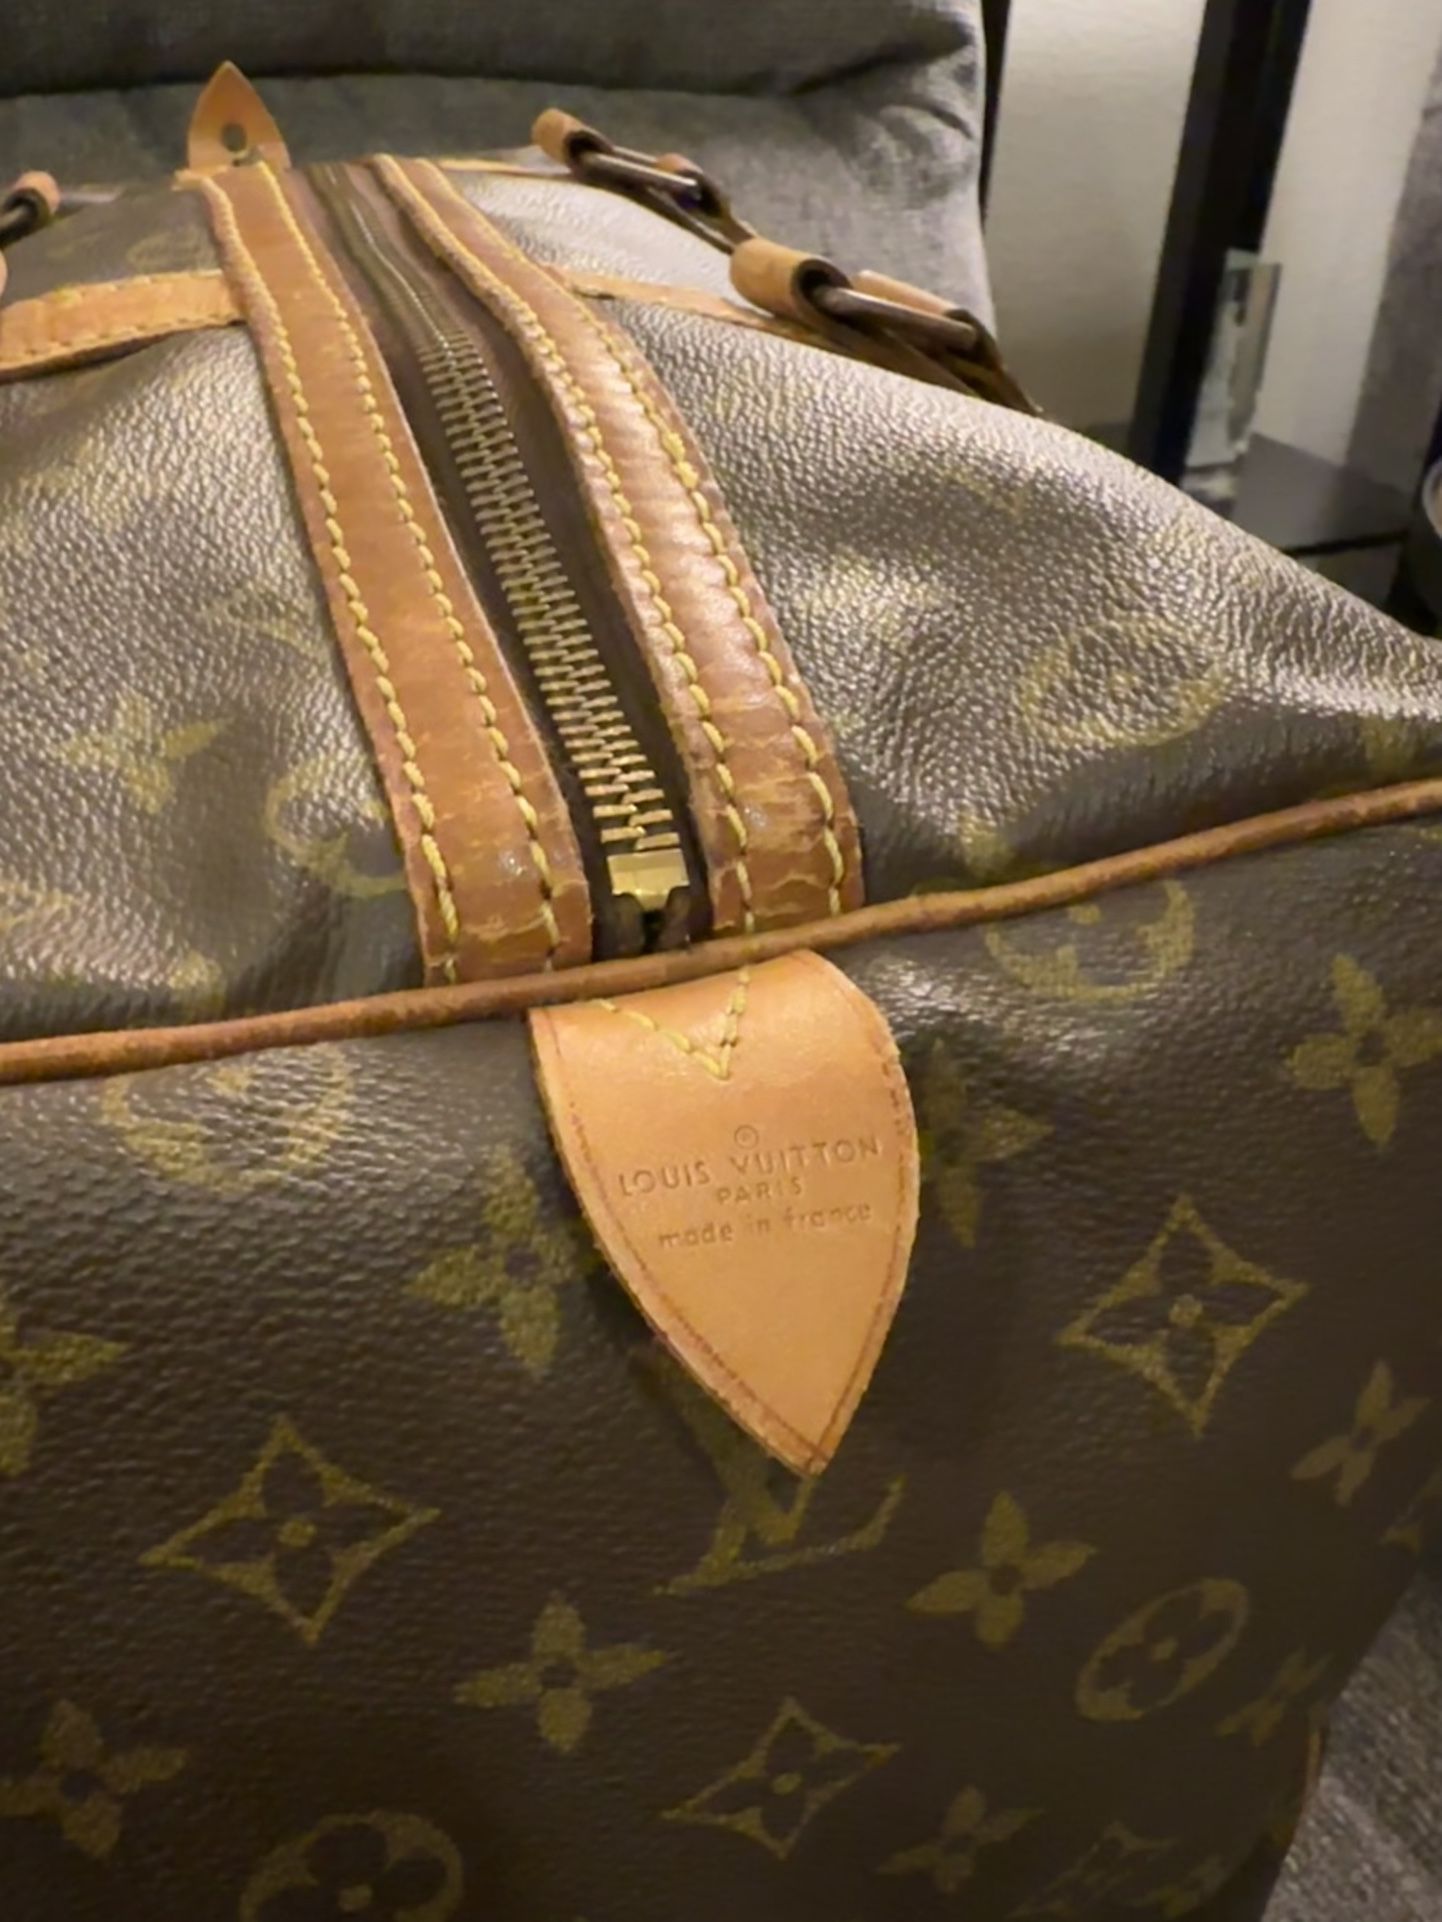 Louis Vuitton Sac Souple 45 Travel Bag for Sale in Hillsboro, OR - OfferUp